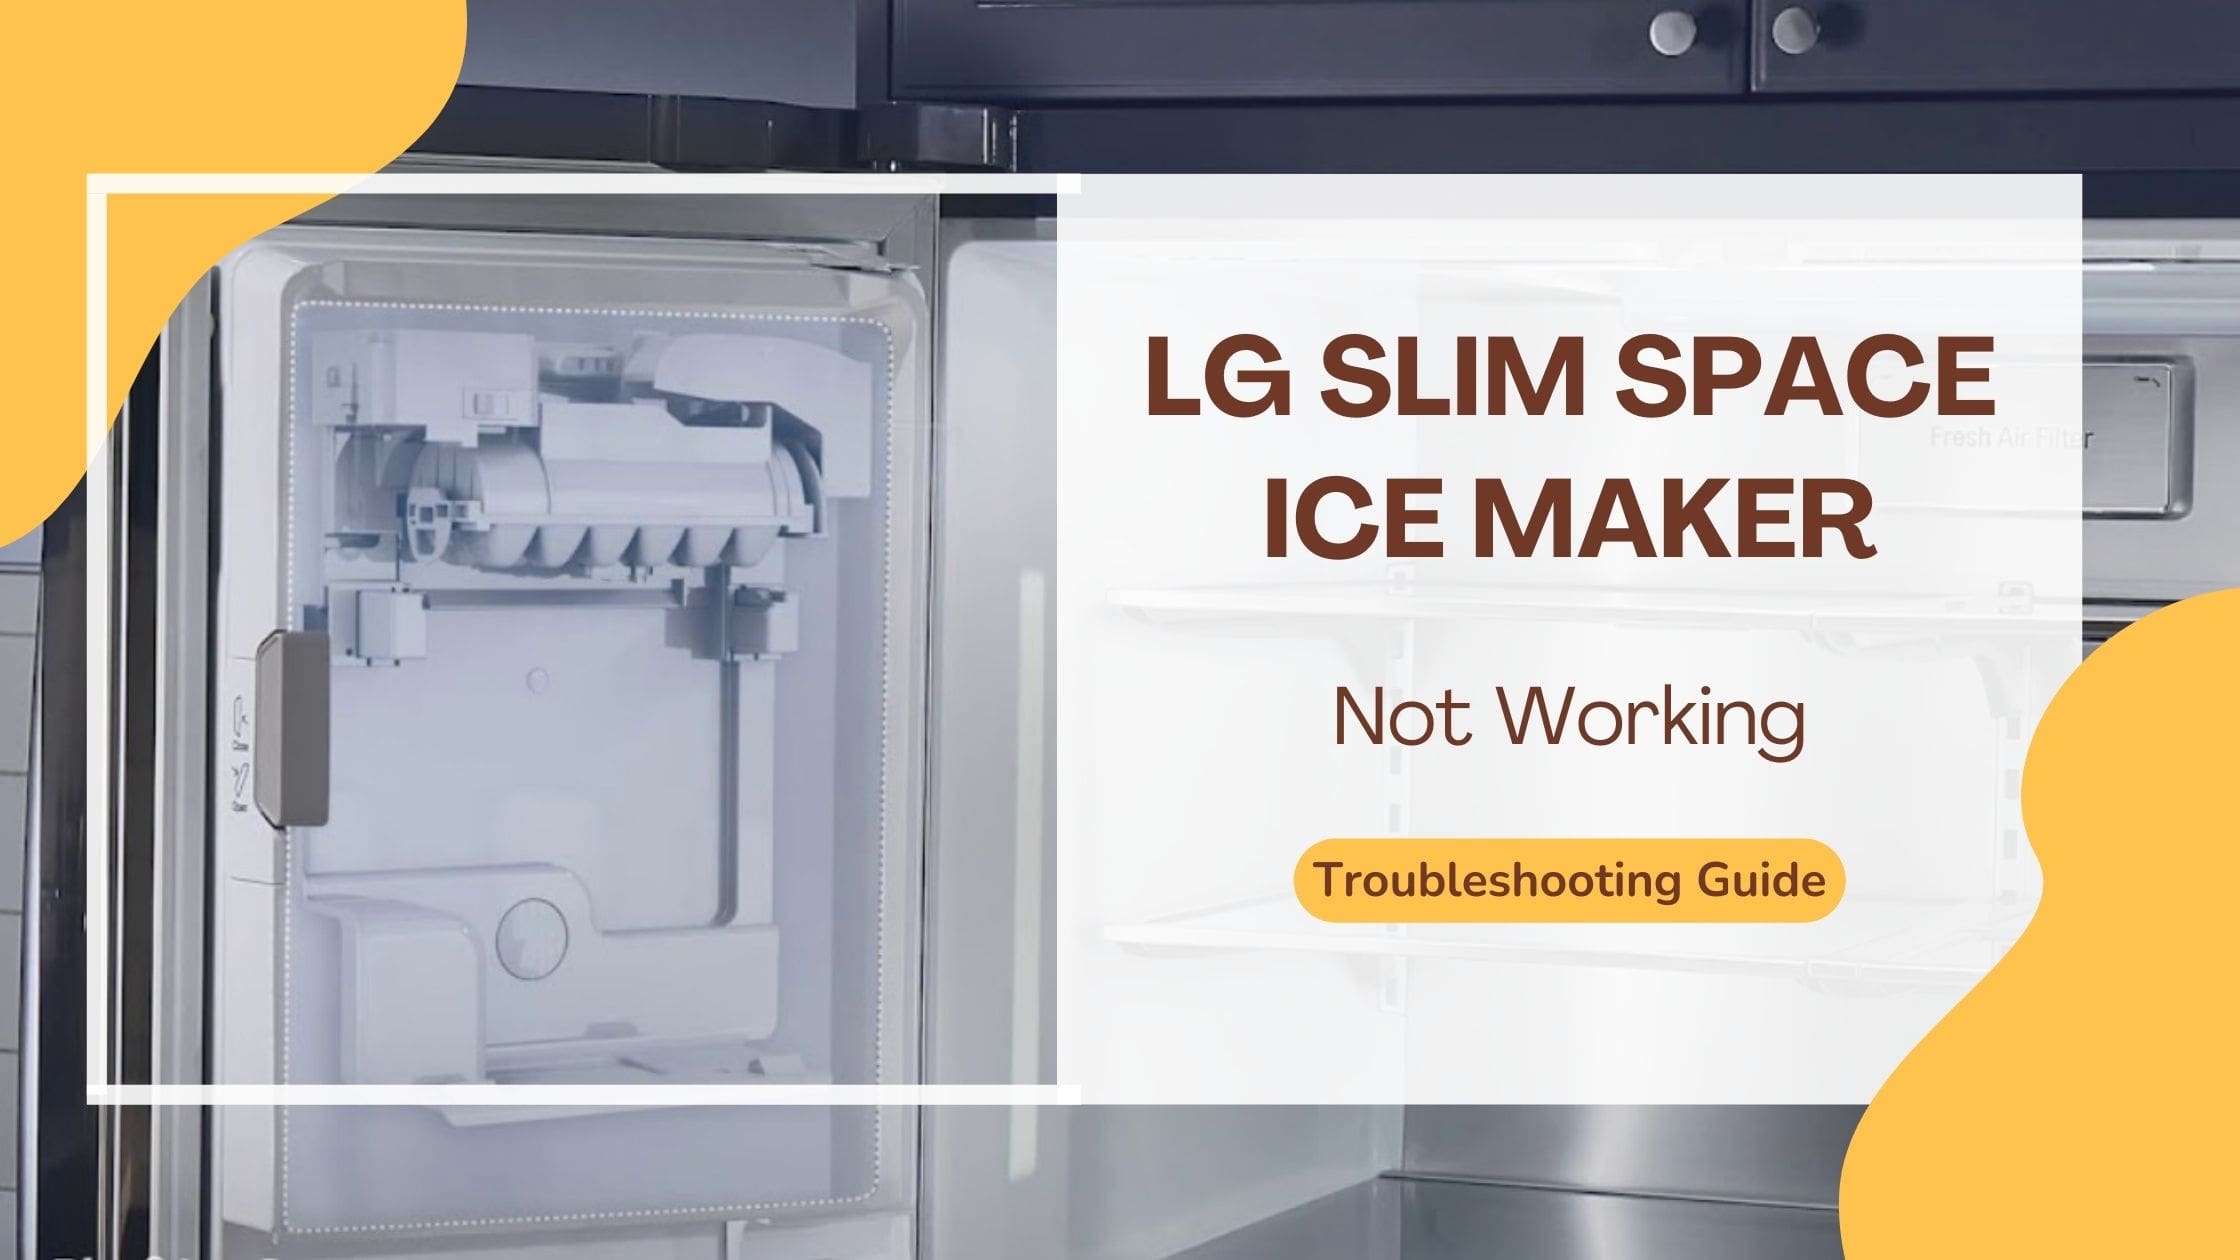 LG Slim Space Ice Maker Not Working